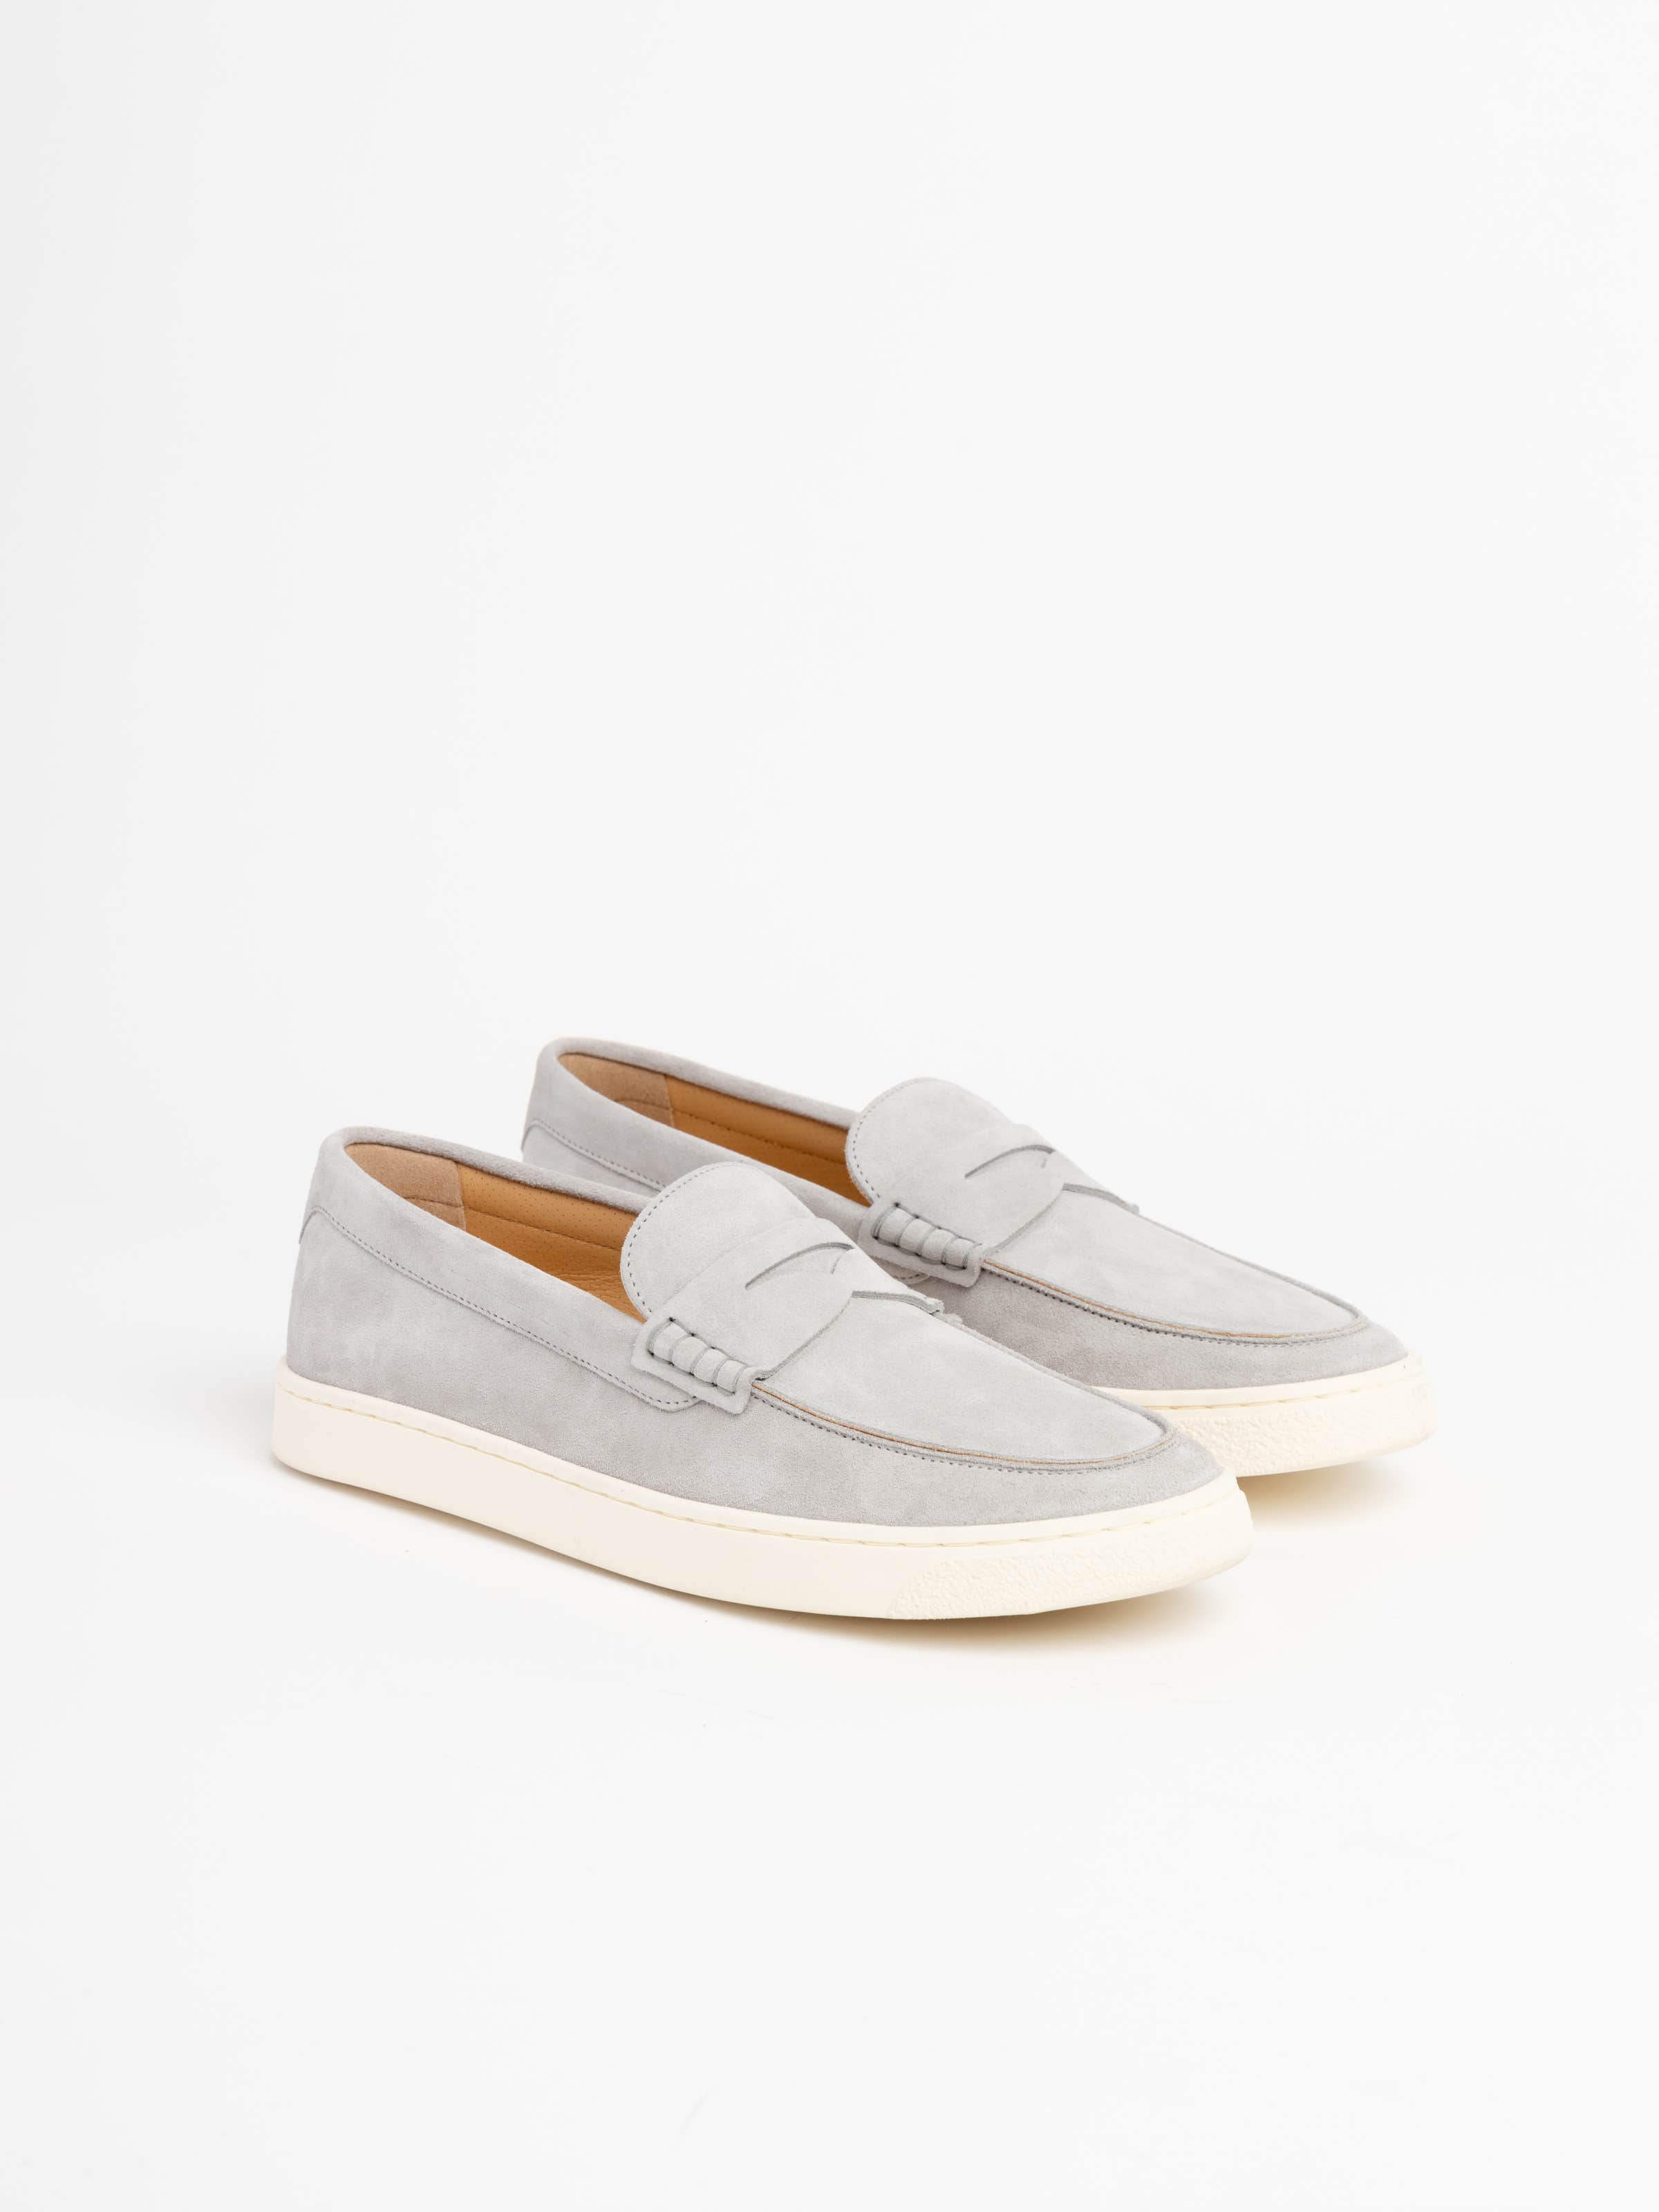 Sand Suede Loafer Sneakers With Natural Rubber Sole